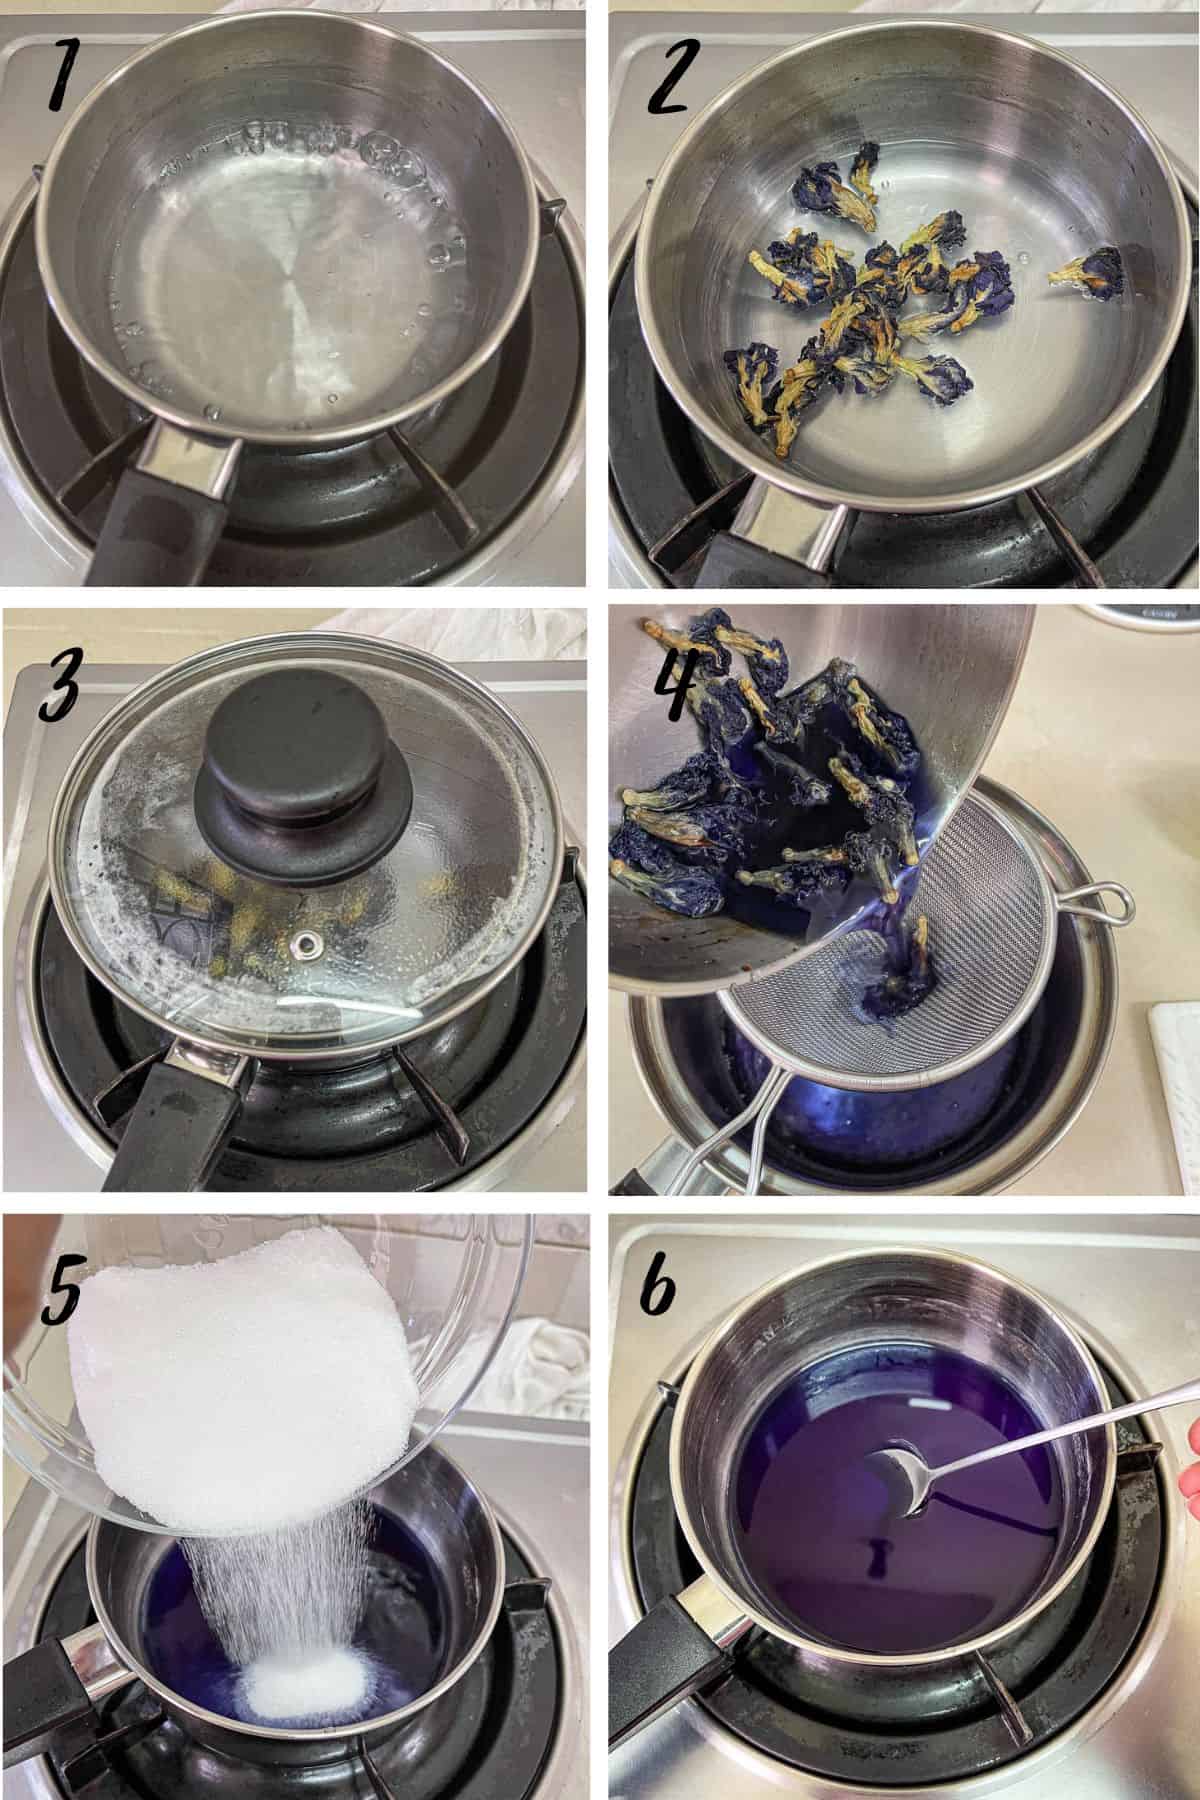 A poster of 6 images showing how to make butterfly pea tea.